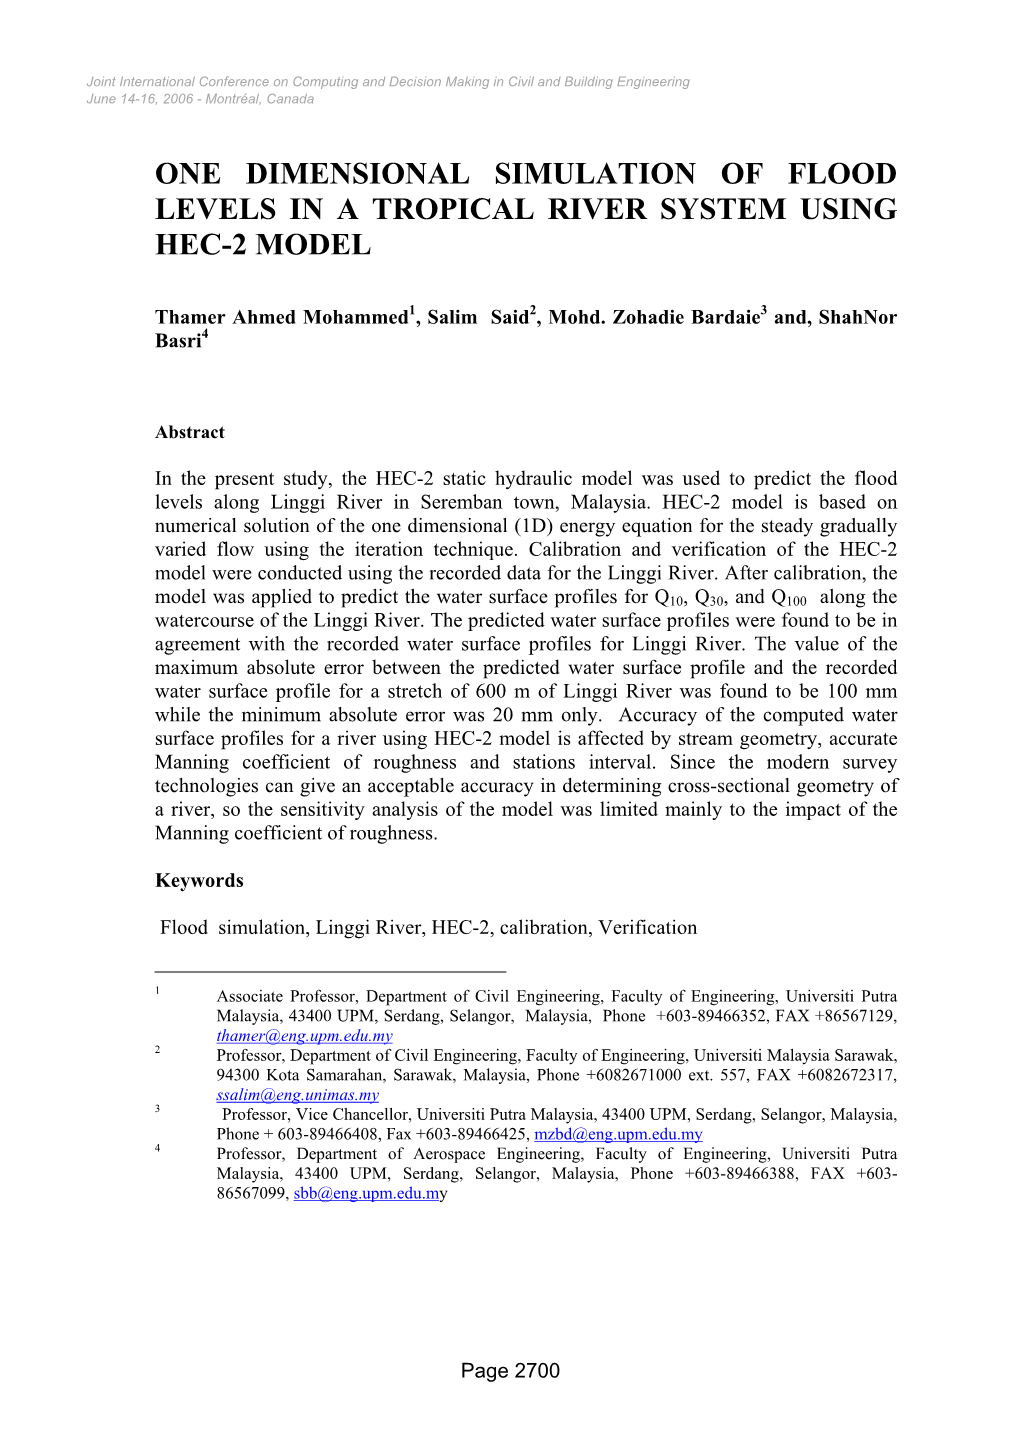 Ic-422 One Dimensional Simulation of Flood Levels in a Tropical River System Using Hec-2 Model